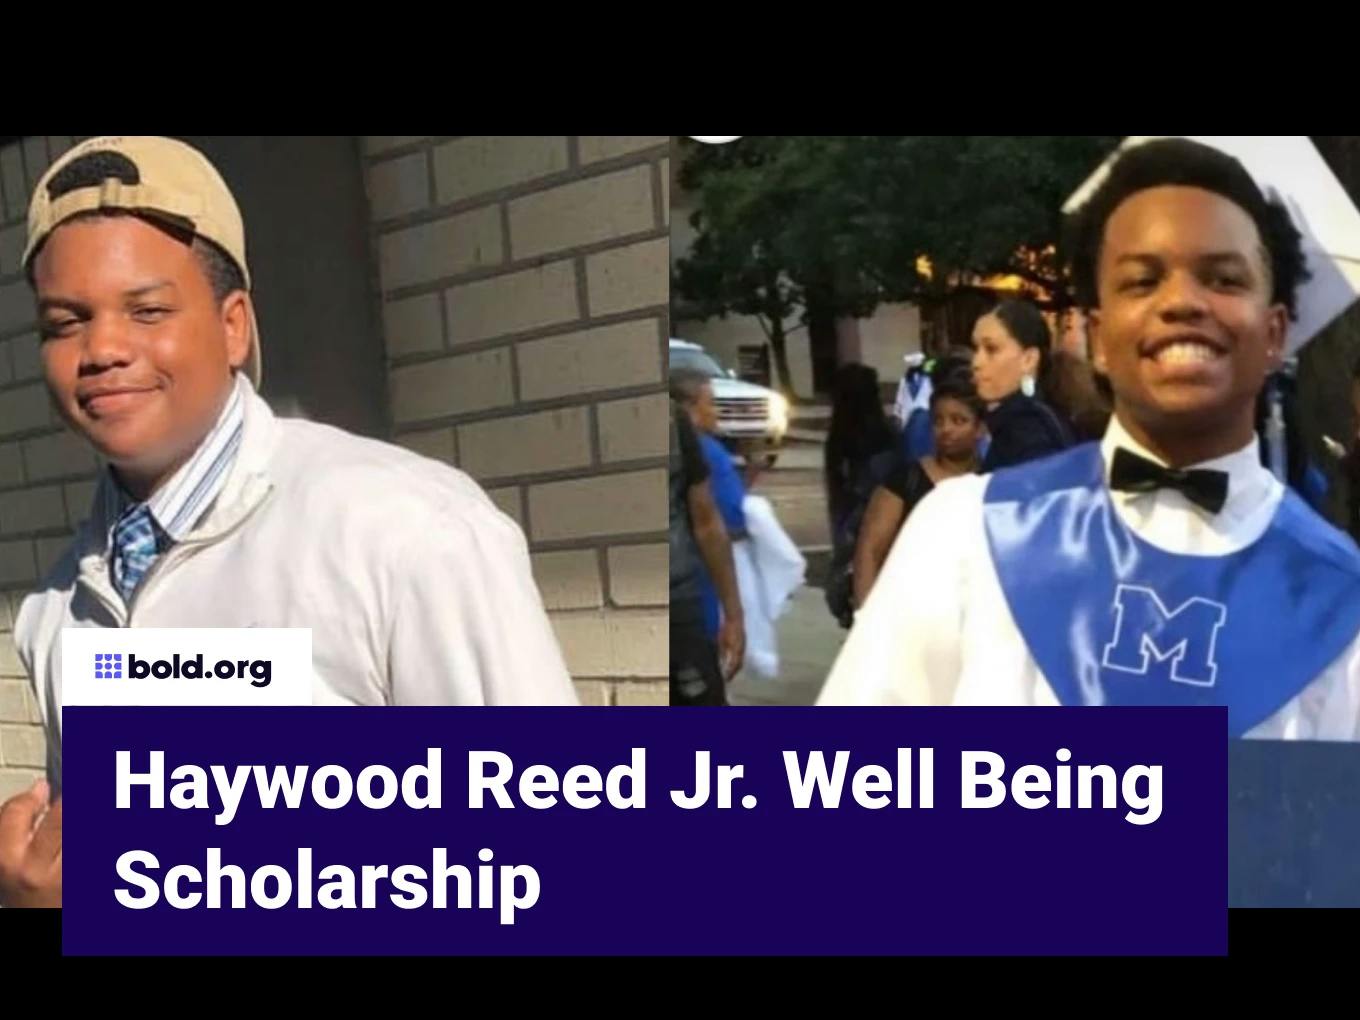 Haywood Reed Jr. Well Being Scholarship